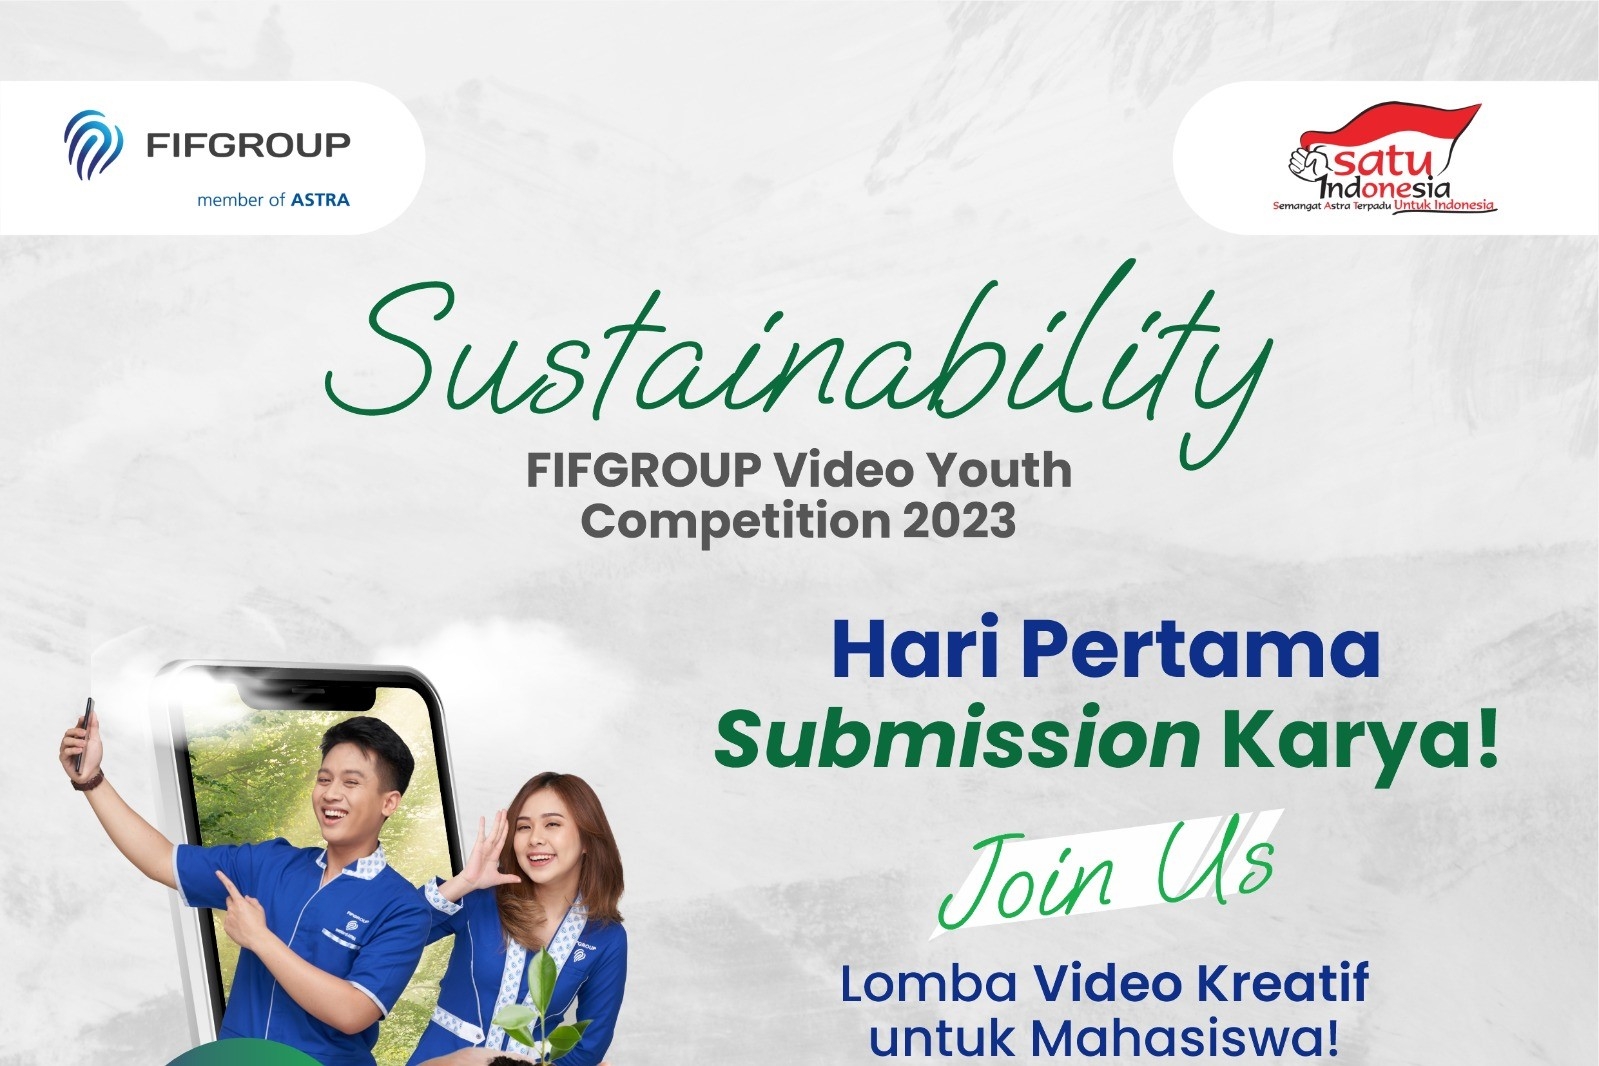 FIFGROUP Video Youth Competition 2023 Kembali Digelar